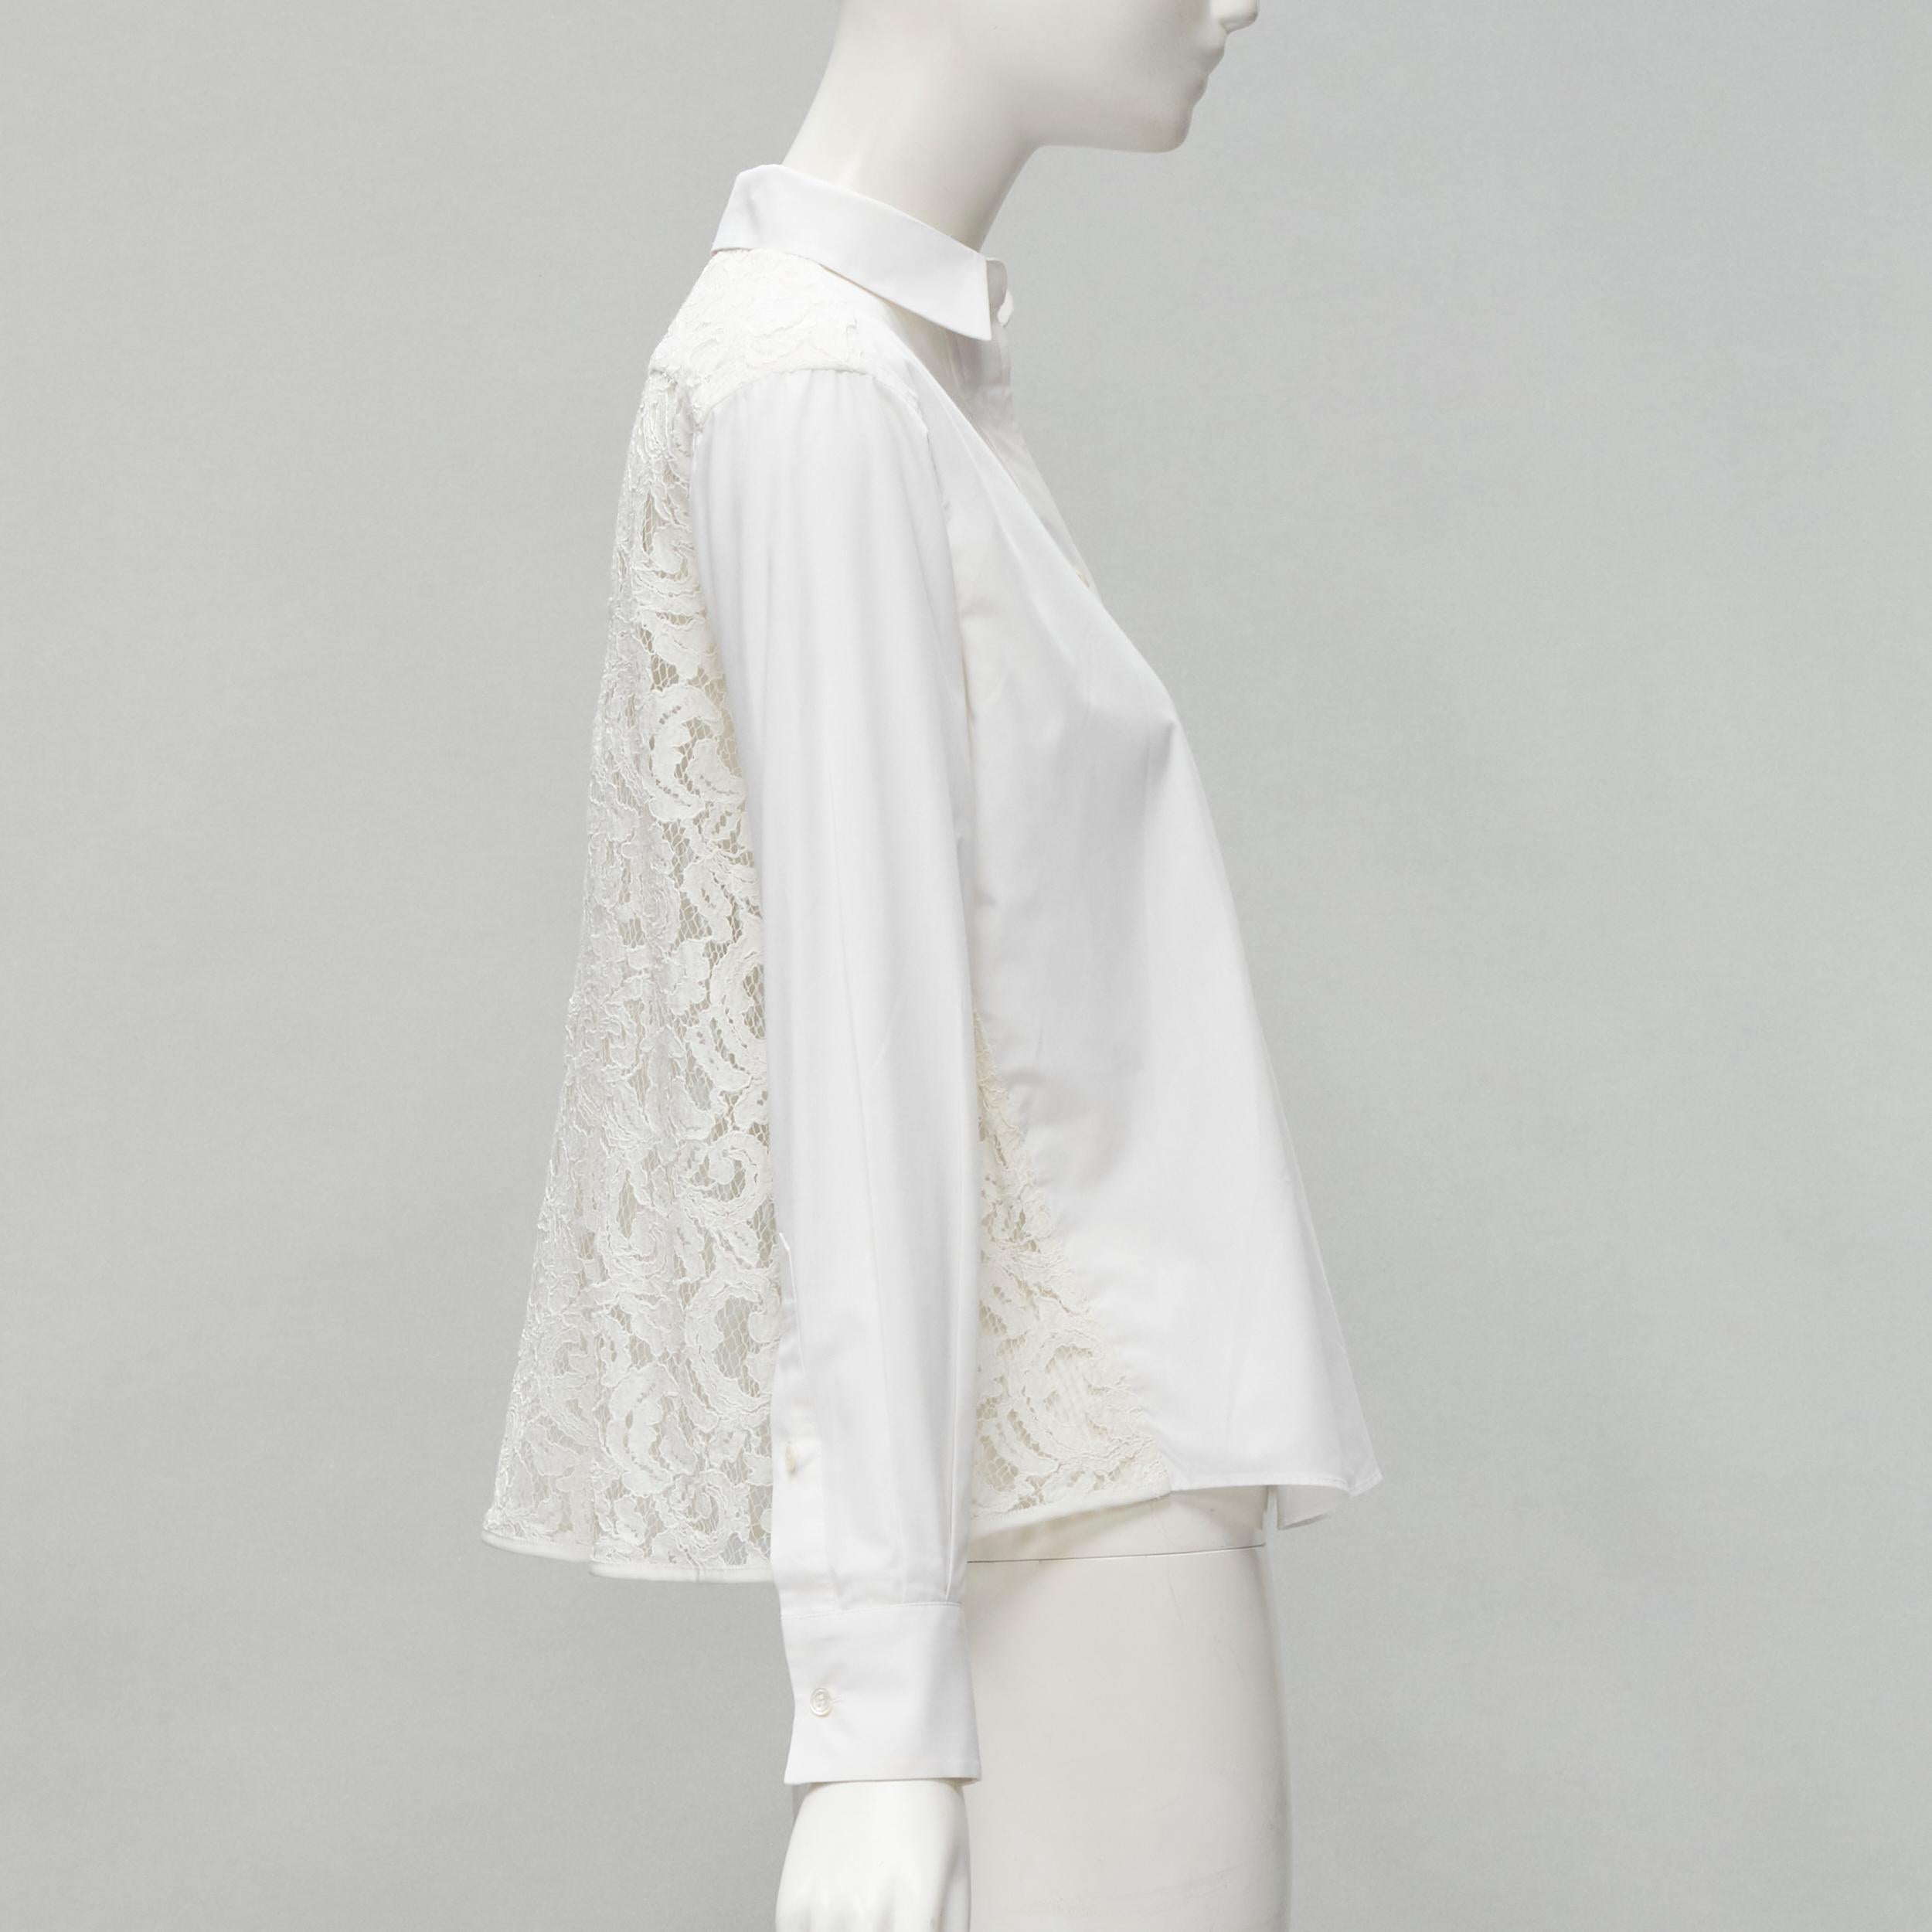 SACAI white cotton floral lace flared back button up shirt JP1 S
Brand: Sacai
Designer: Chitose Abe
Collection: 2016 
Material: Cotton
Color: White
Pattern: Solid
Closure: Button
Extra Detail: Grosgrain trimmed along placket. Flared lace back.
Made